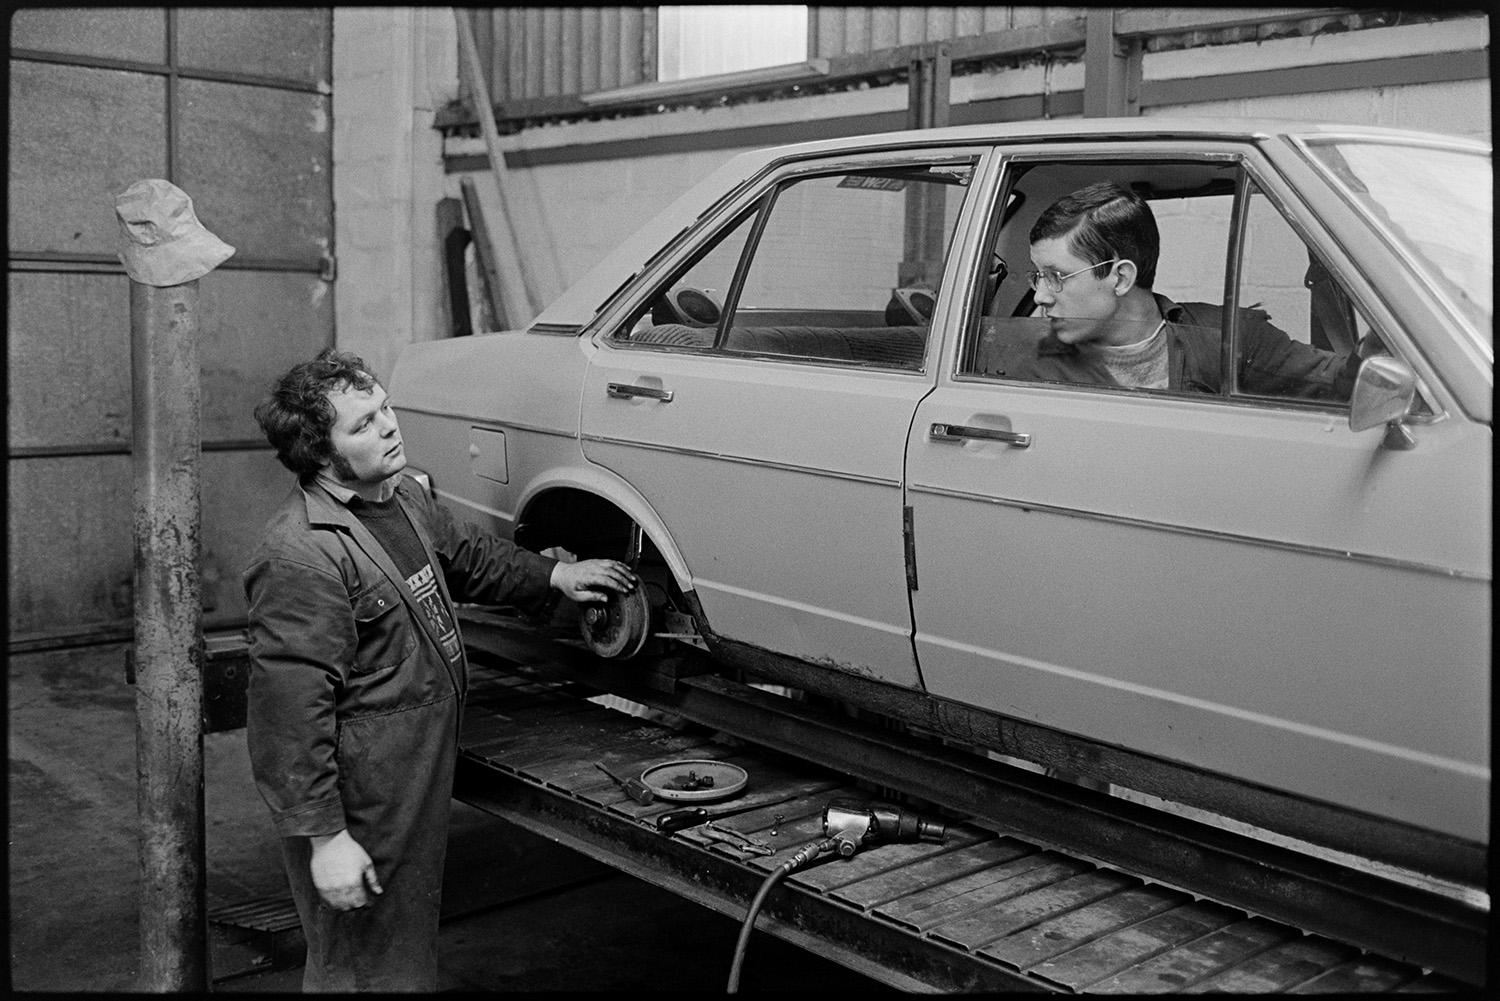 Men working in garage, tools, oil cans, tyres, mending puncture. 
[Ron Turner changing a tyre on a car on a ramp at Dolton Beacon Garage.  He is talking to a person sat in the drivers seat of the car.]